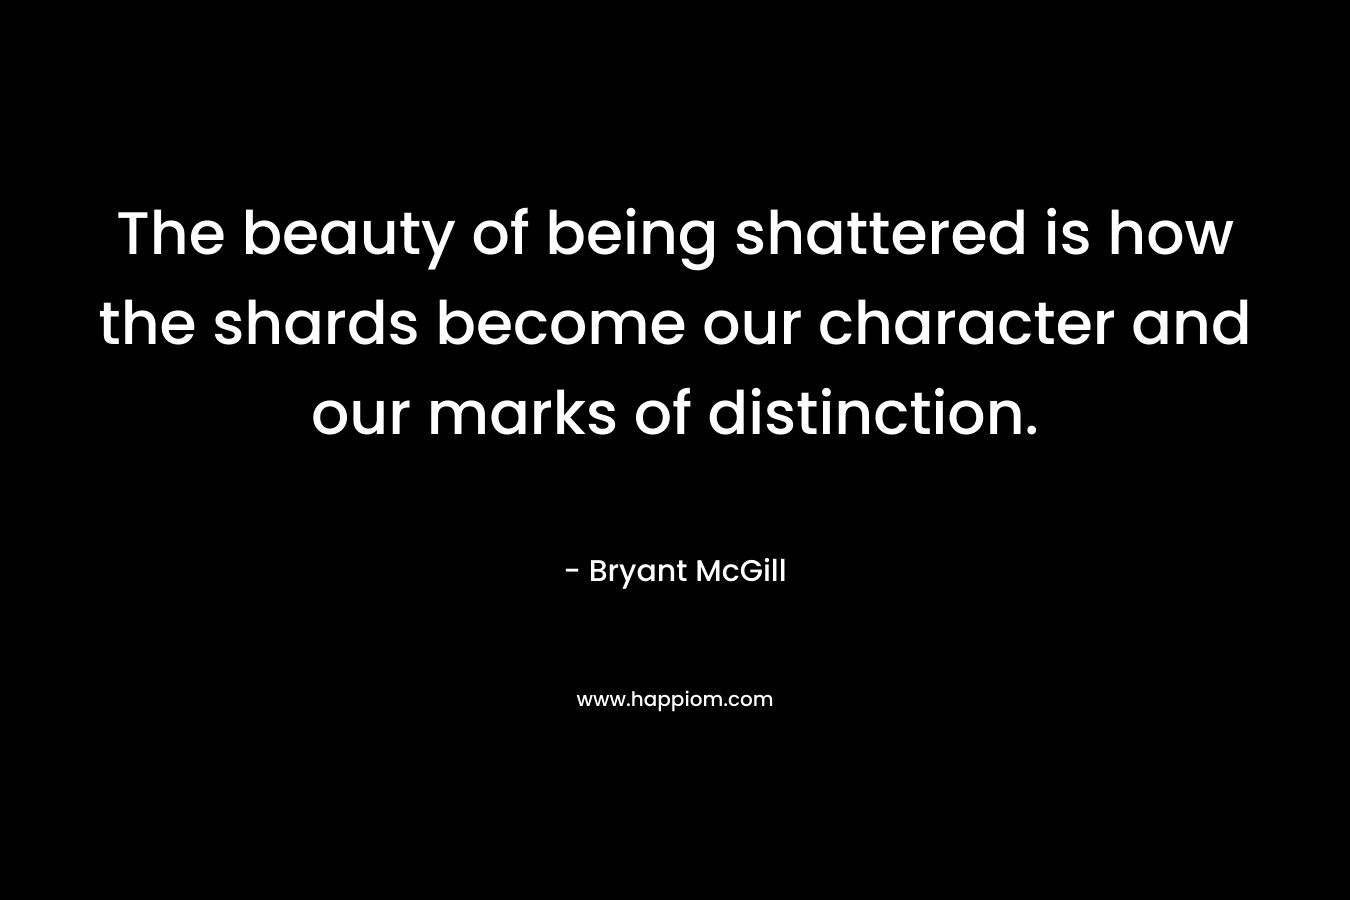 The beauty of being shattered is how the shards become our character and our marks of distinction. – Bryant McGill